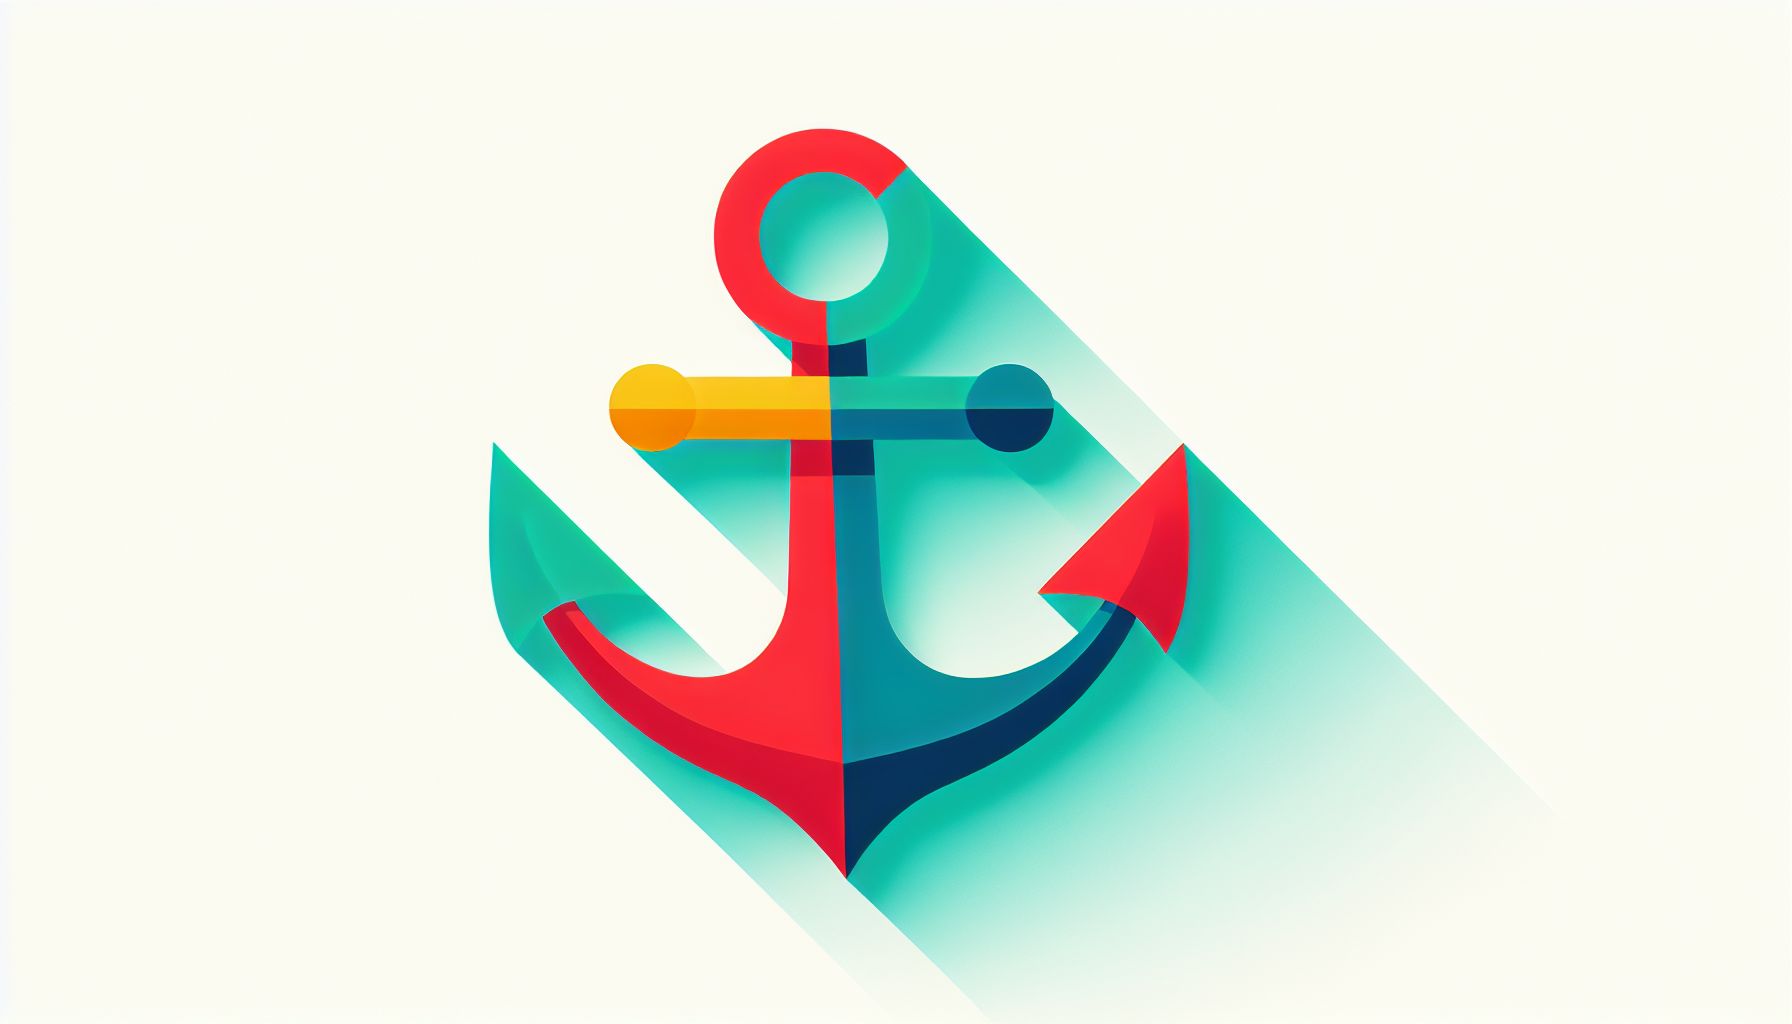 Anchor in flat illustration style and white background, red #f47574, green #88c7a8, yellow #fcc44b, and blue #645bc8 colors.